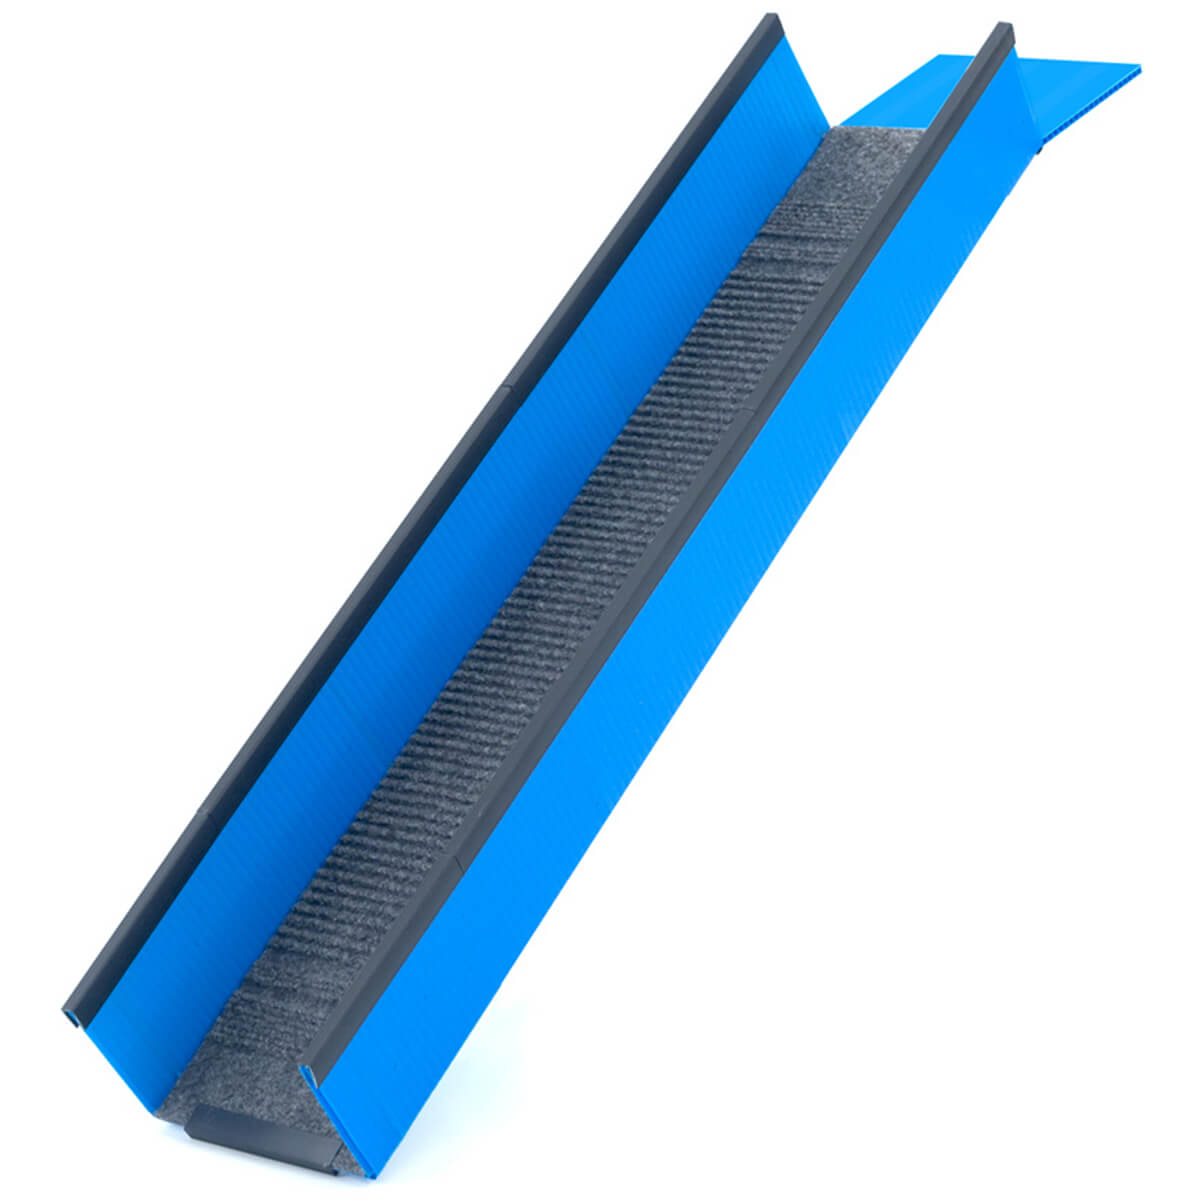 Cagetopia C&C Ramp for guinea pig cages - blue